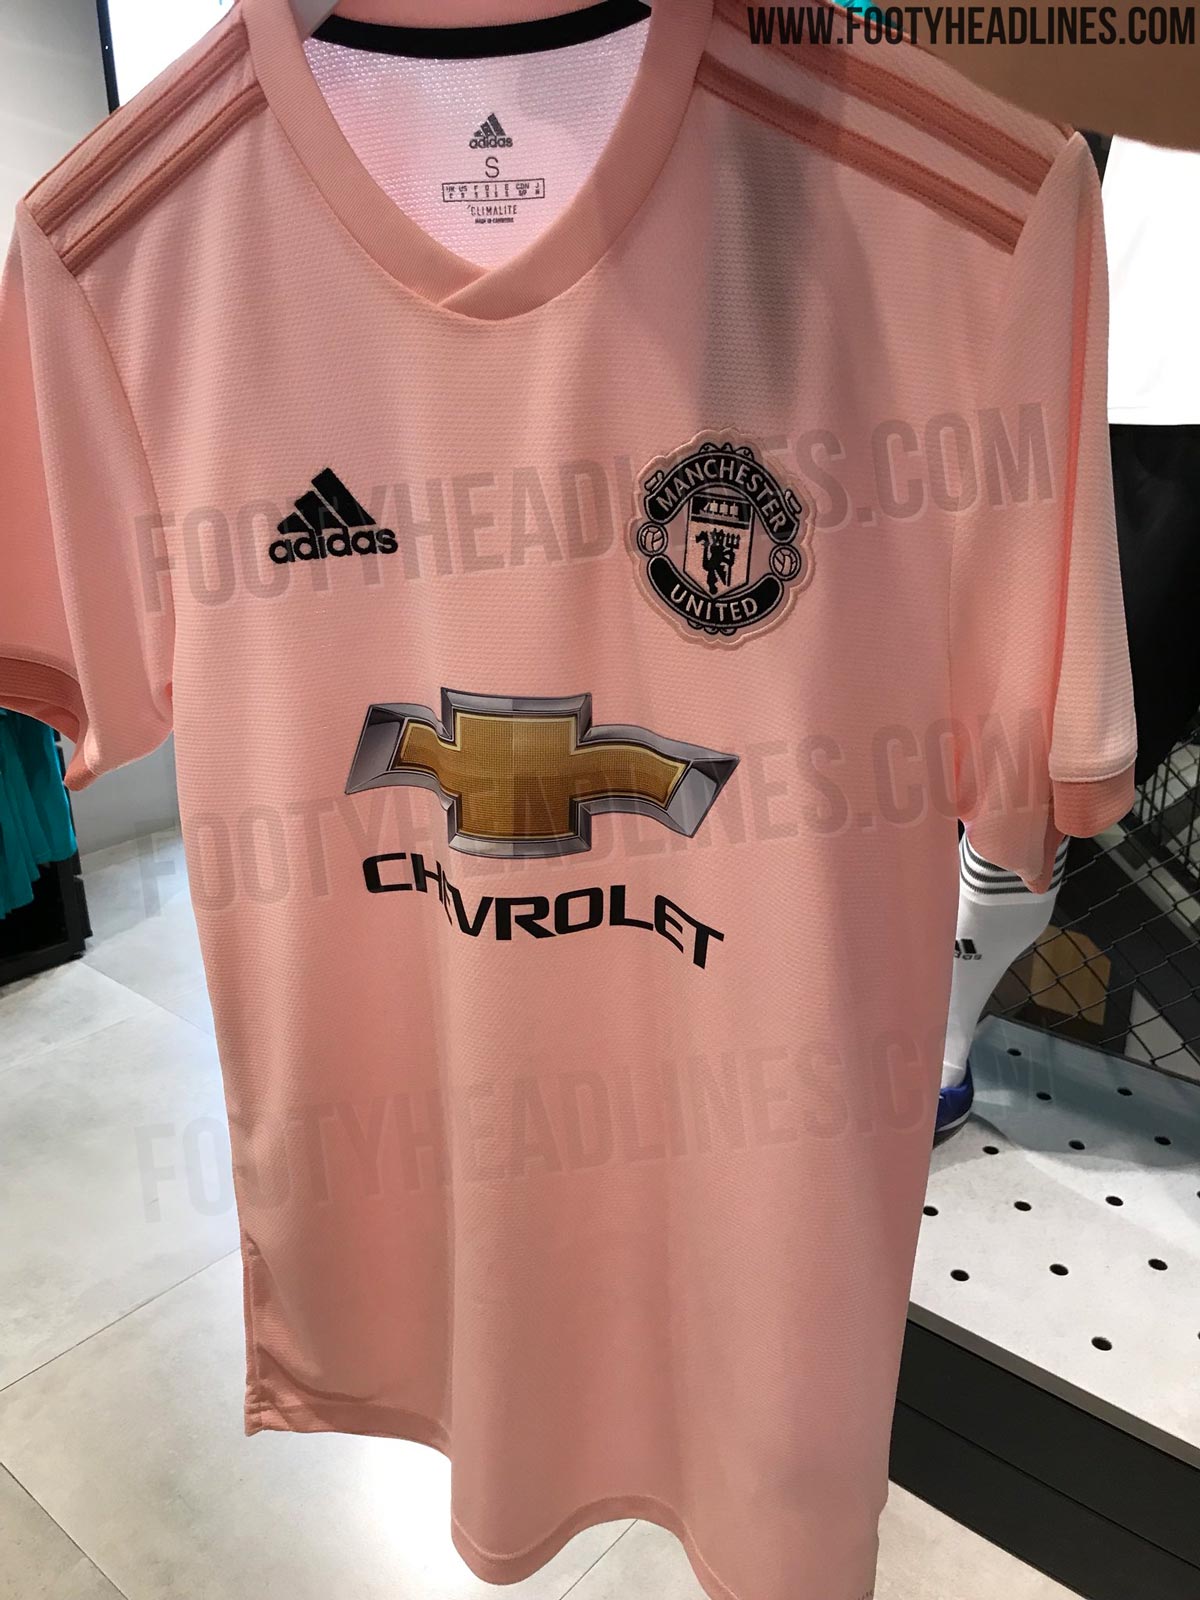 Manchester United 18-19 Away Kit Leaked - Footy Headlines